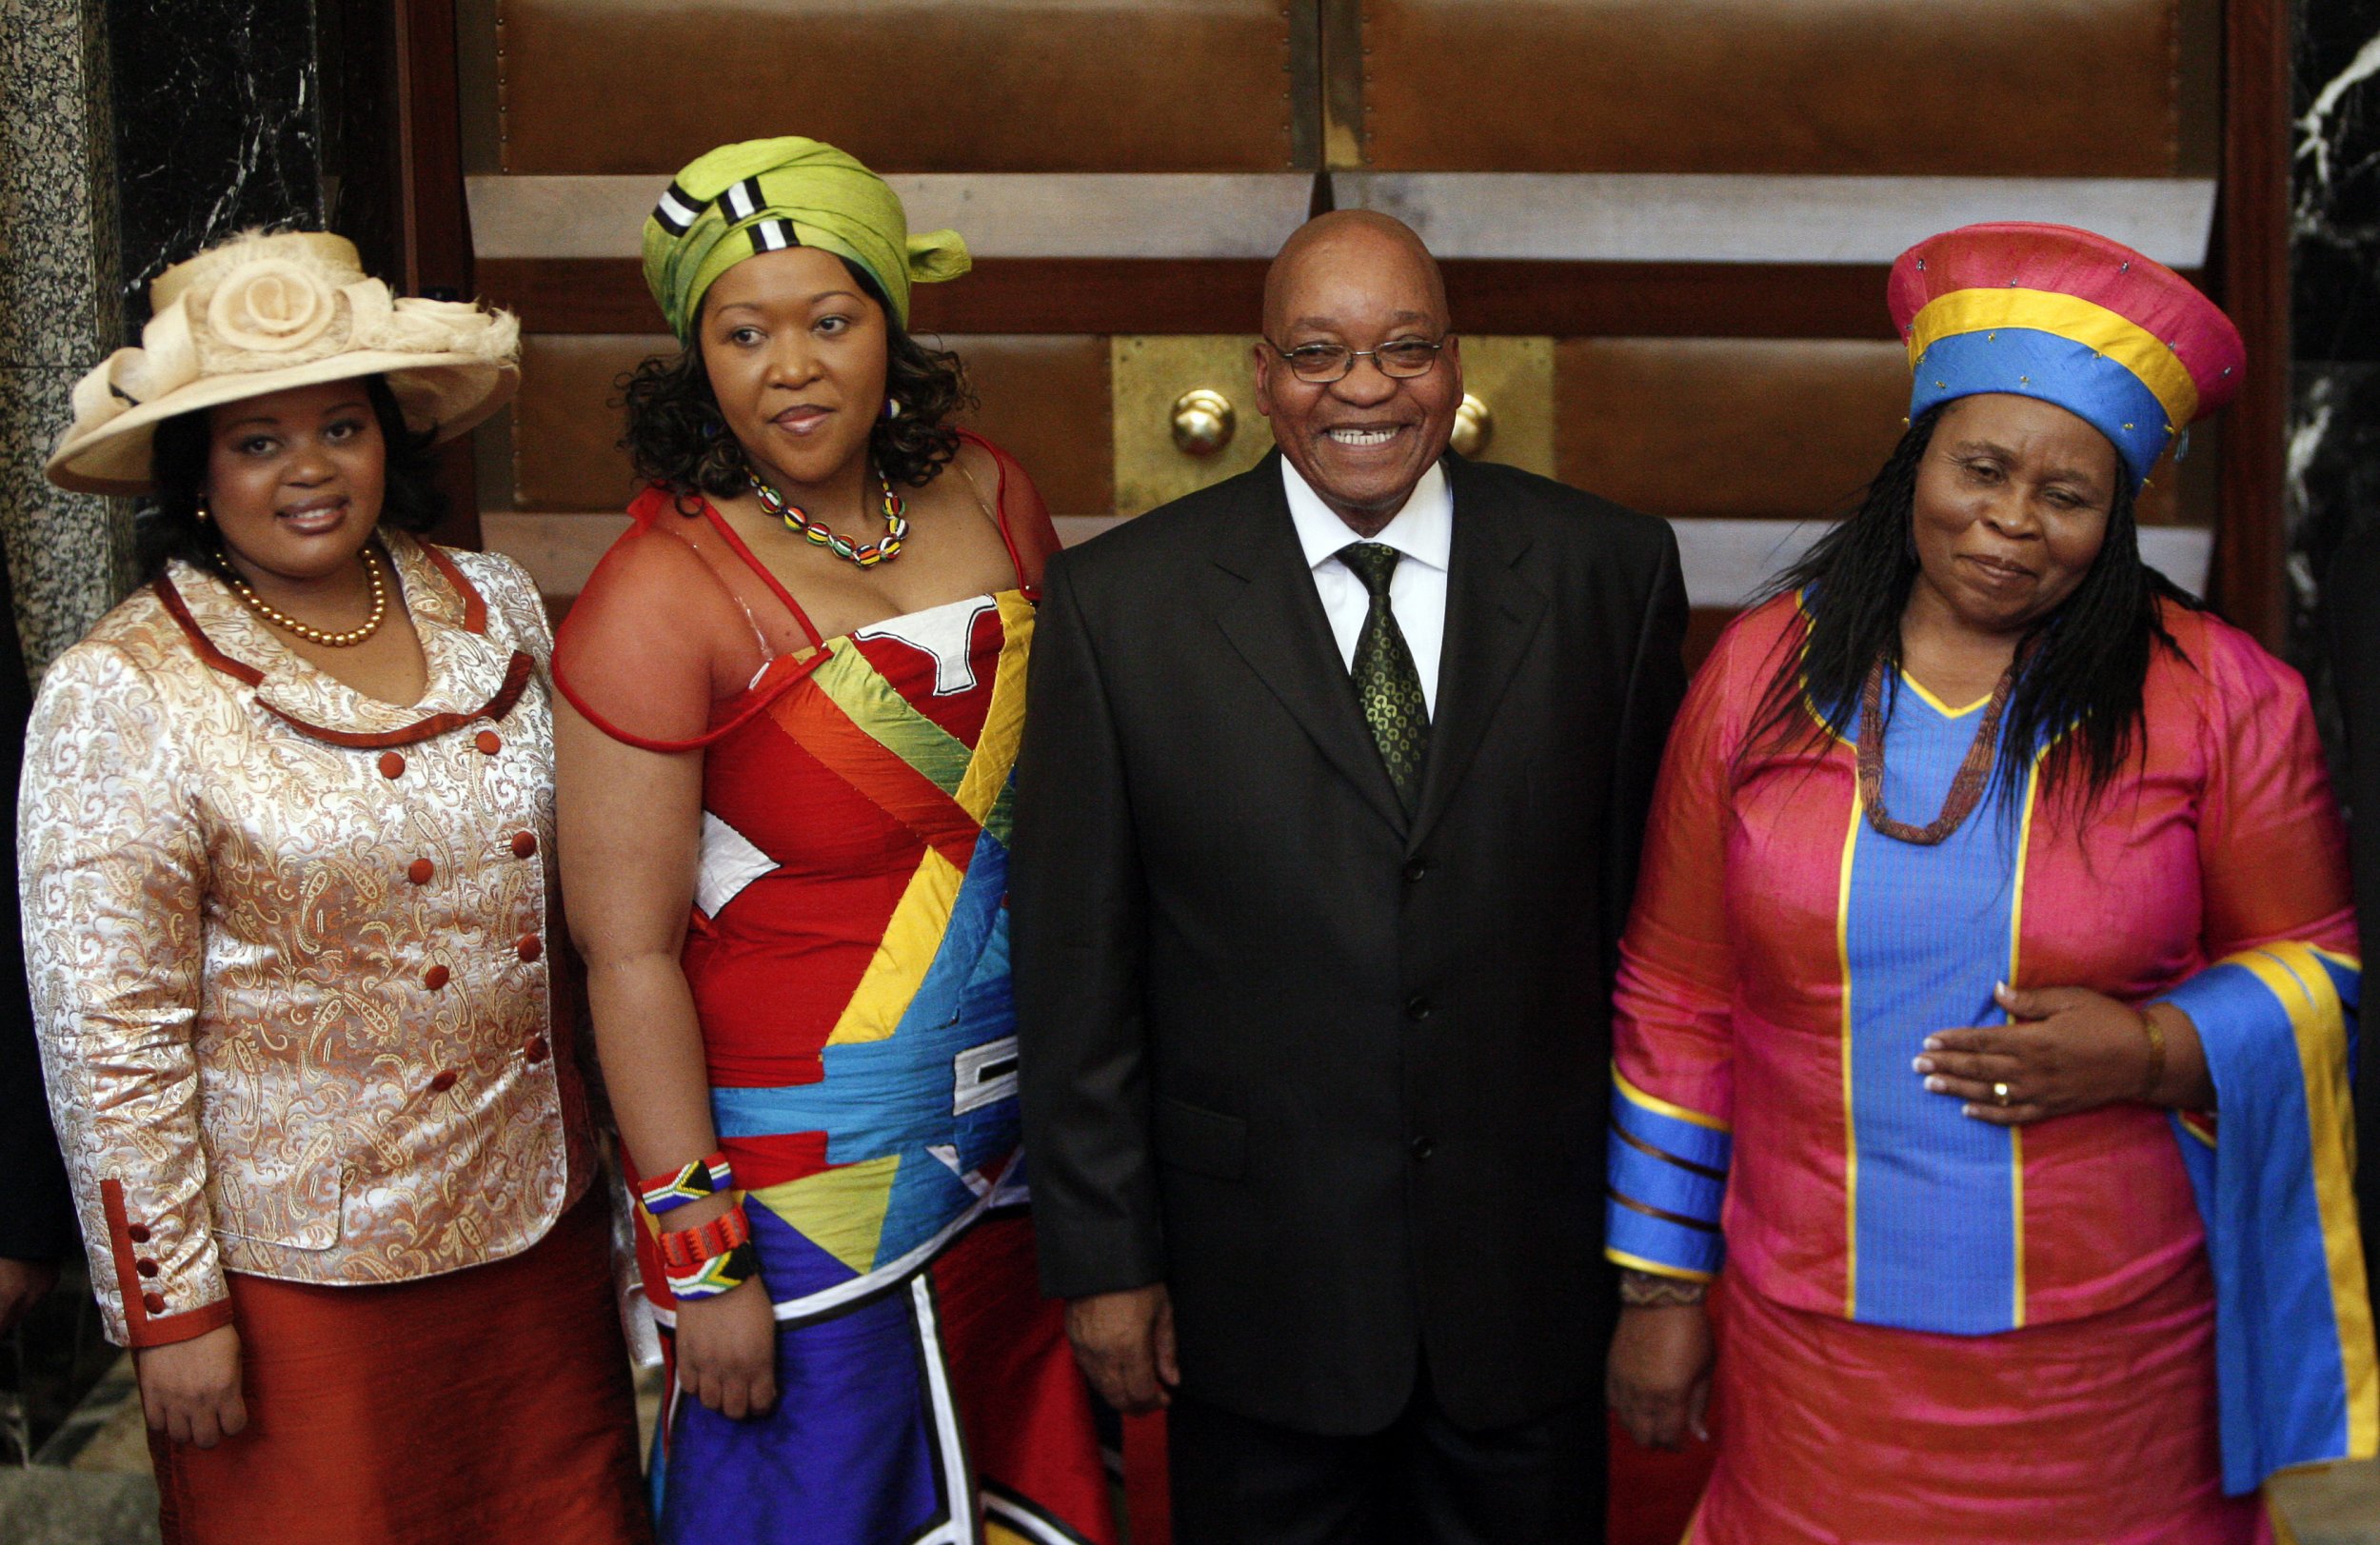 South African President Jacob Zuma with three of his wives.